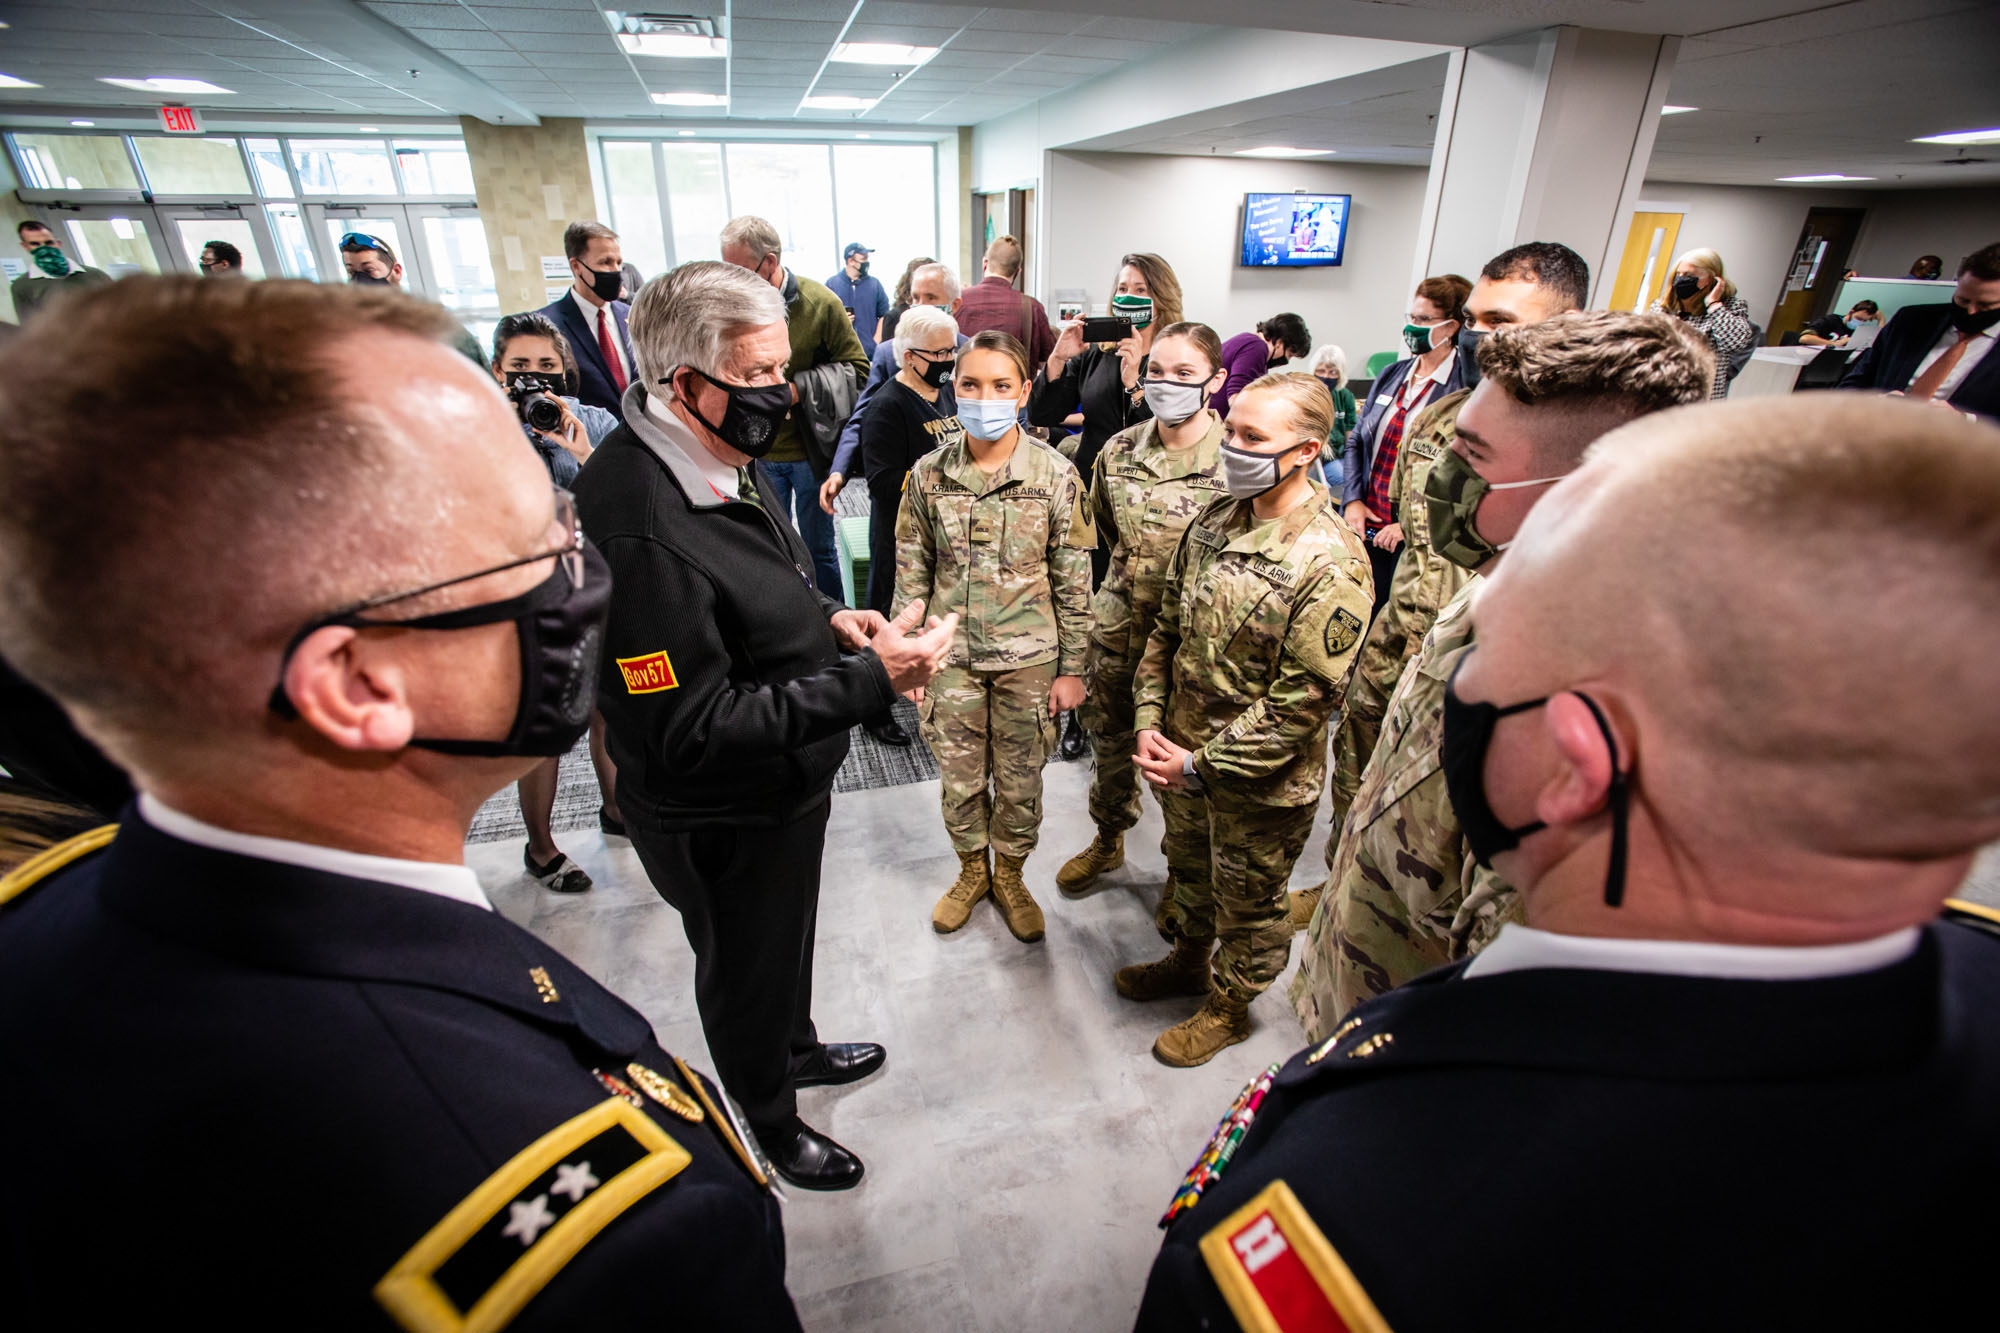 Gov. Mike Parson converses with Northwest students enrolled in the Missouri GOLD program, which provides them an opportunity to study military science while gaining valuable leadership training in preparation for becoming officers in the Missouri Army National Guard.